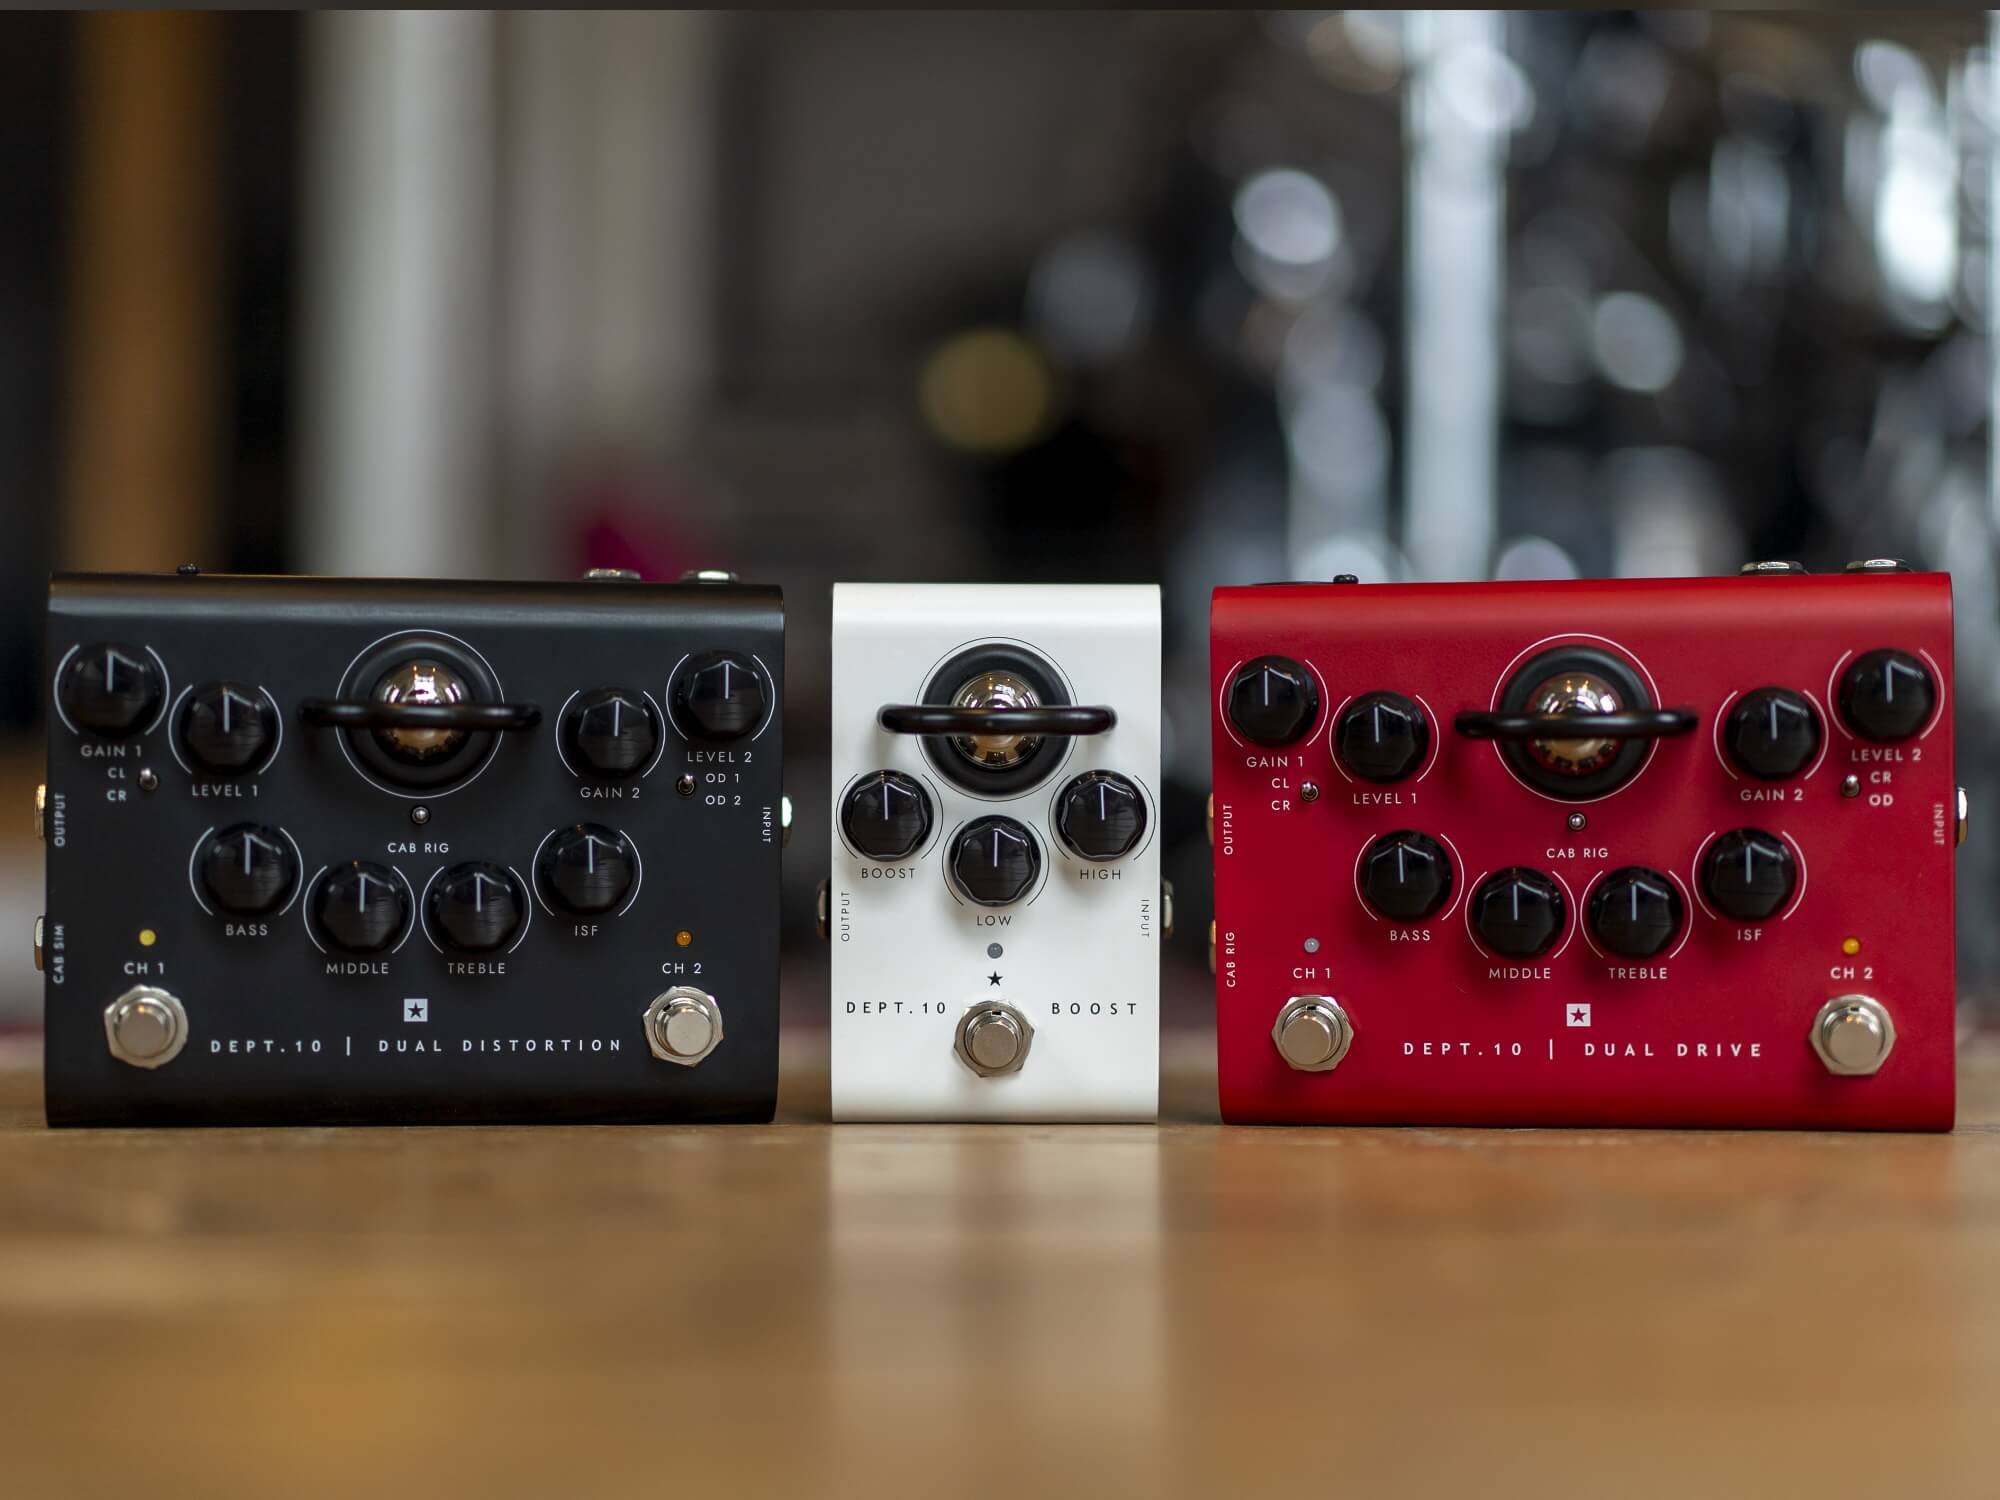 Blackstar's Dept. 10 pedals match the natural feel of valve amps